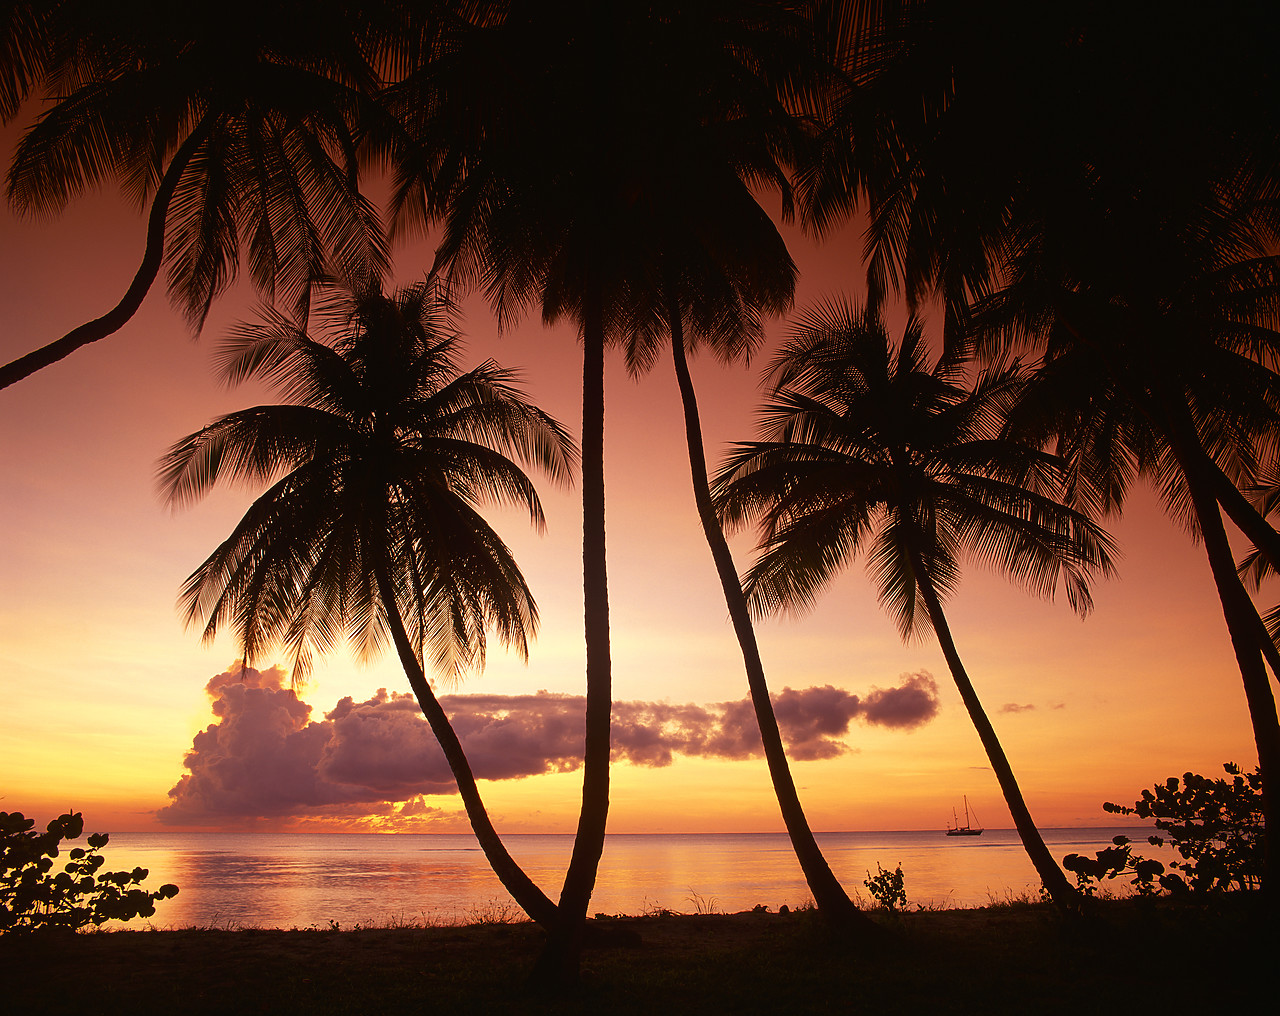 #200107-5 - Palm Trees at Sunset, Pigeon Point, Tobago, West Indies, Caribbean